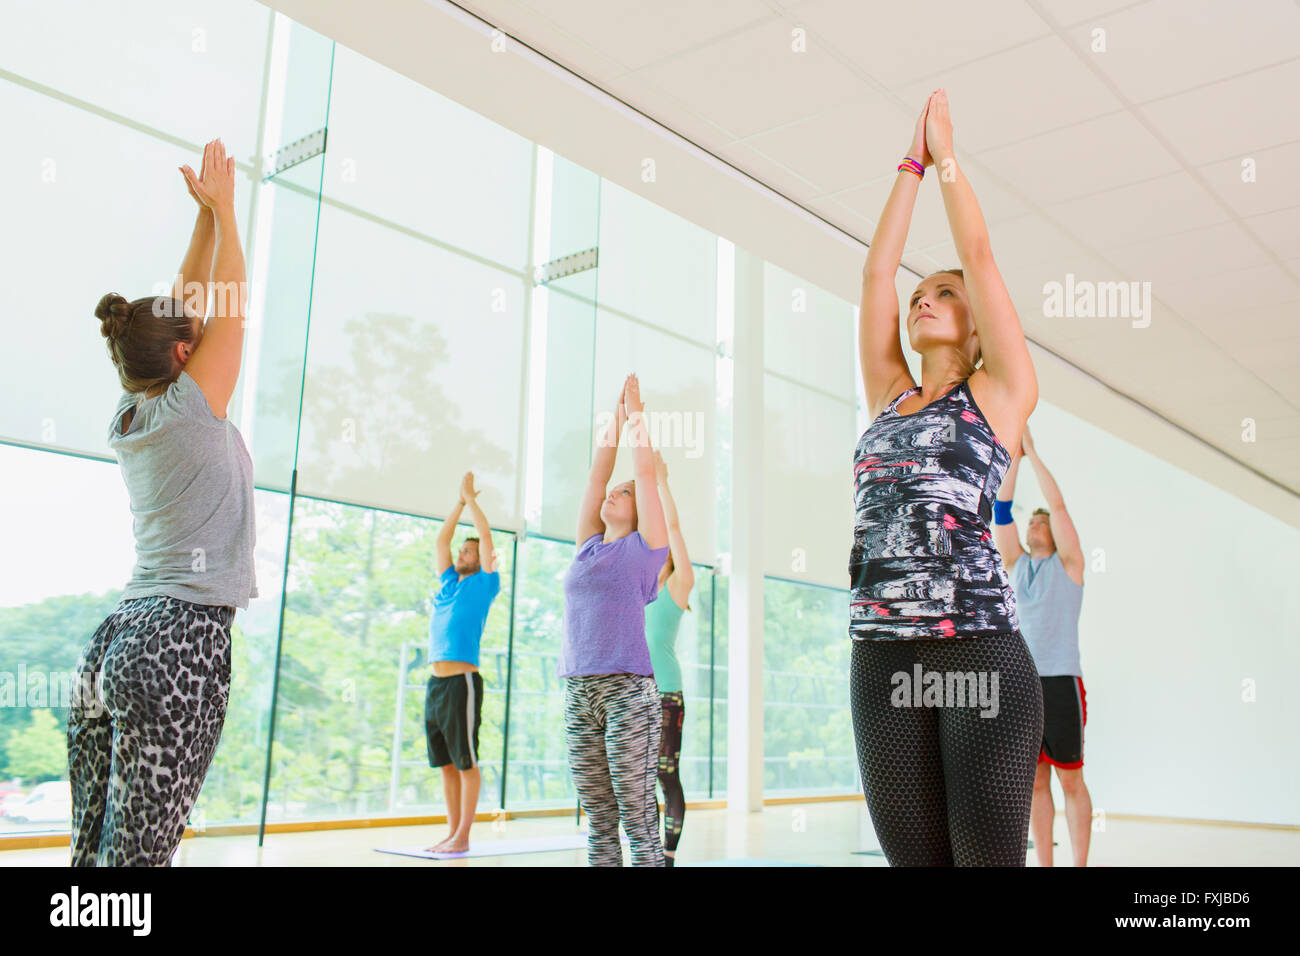 Yoga class with arms raised Stock Photo